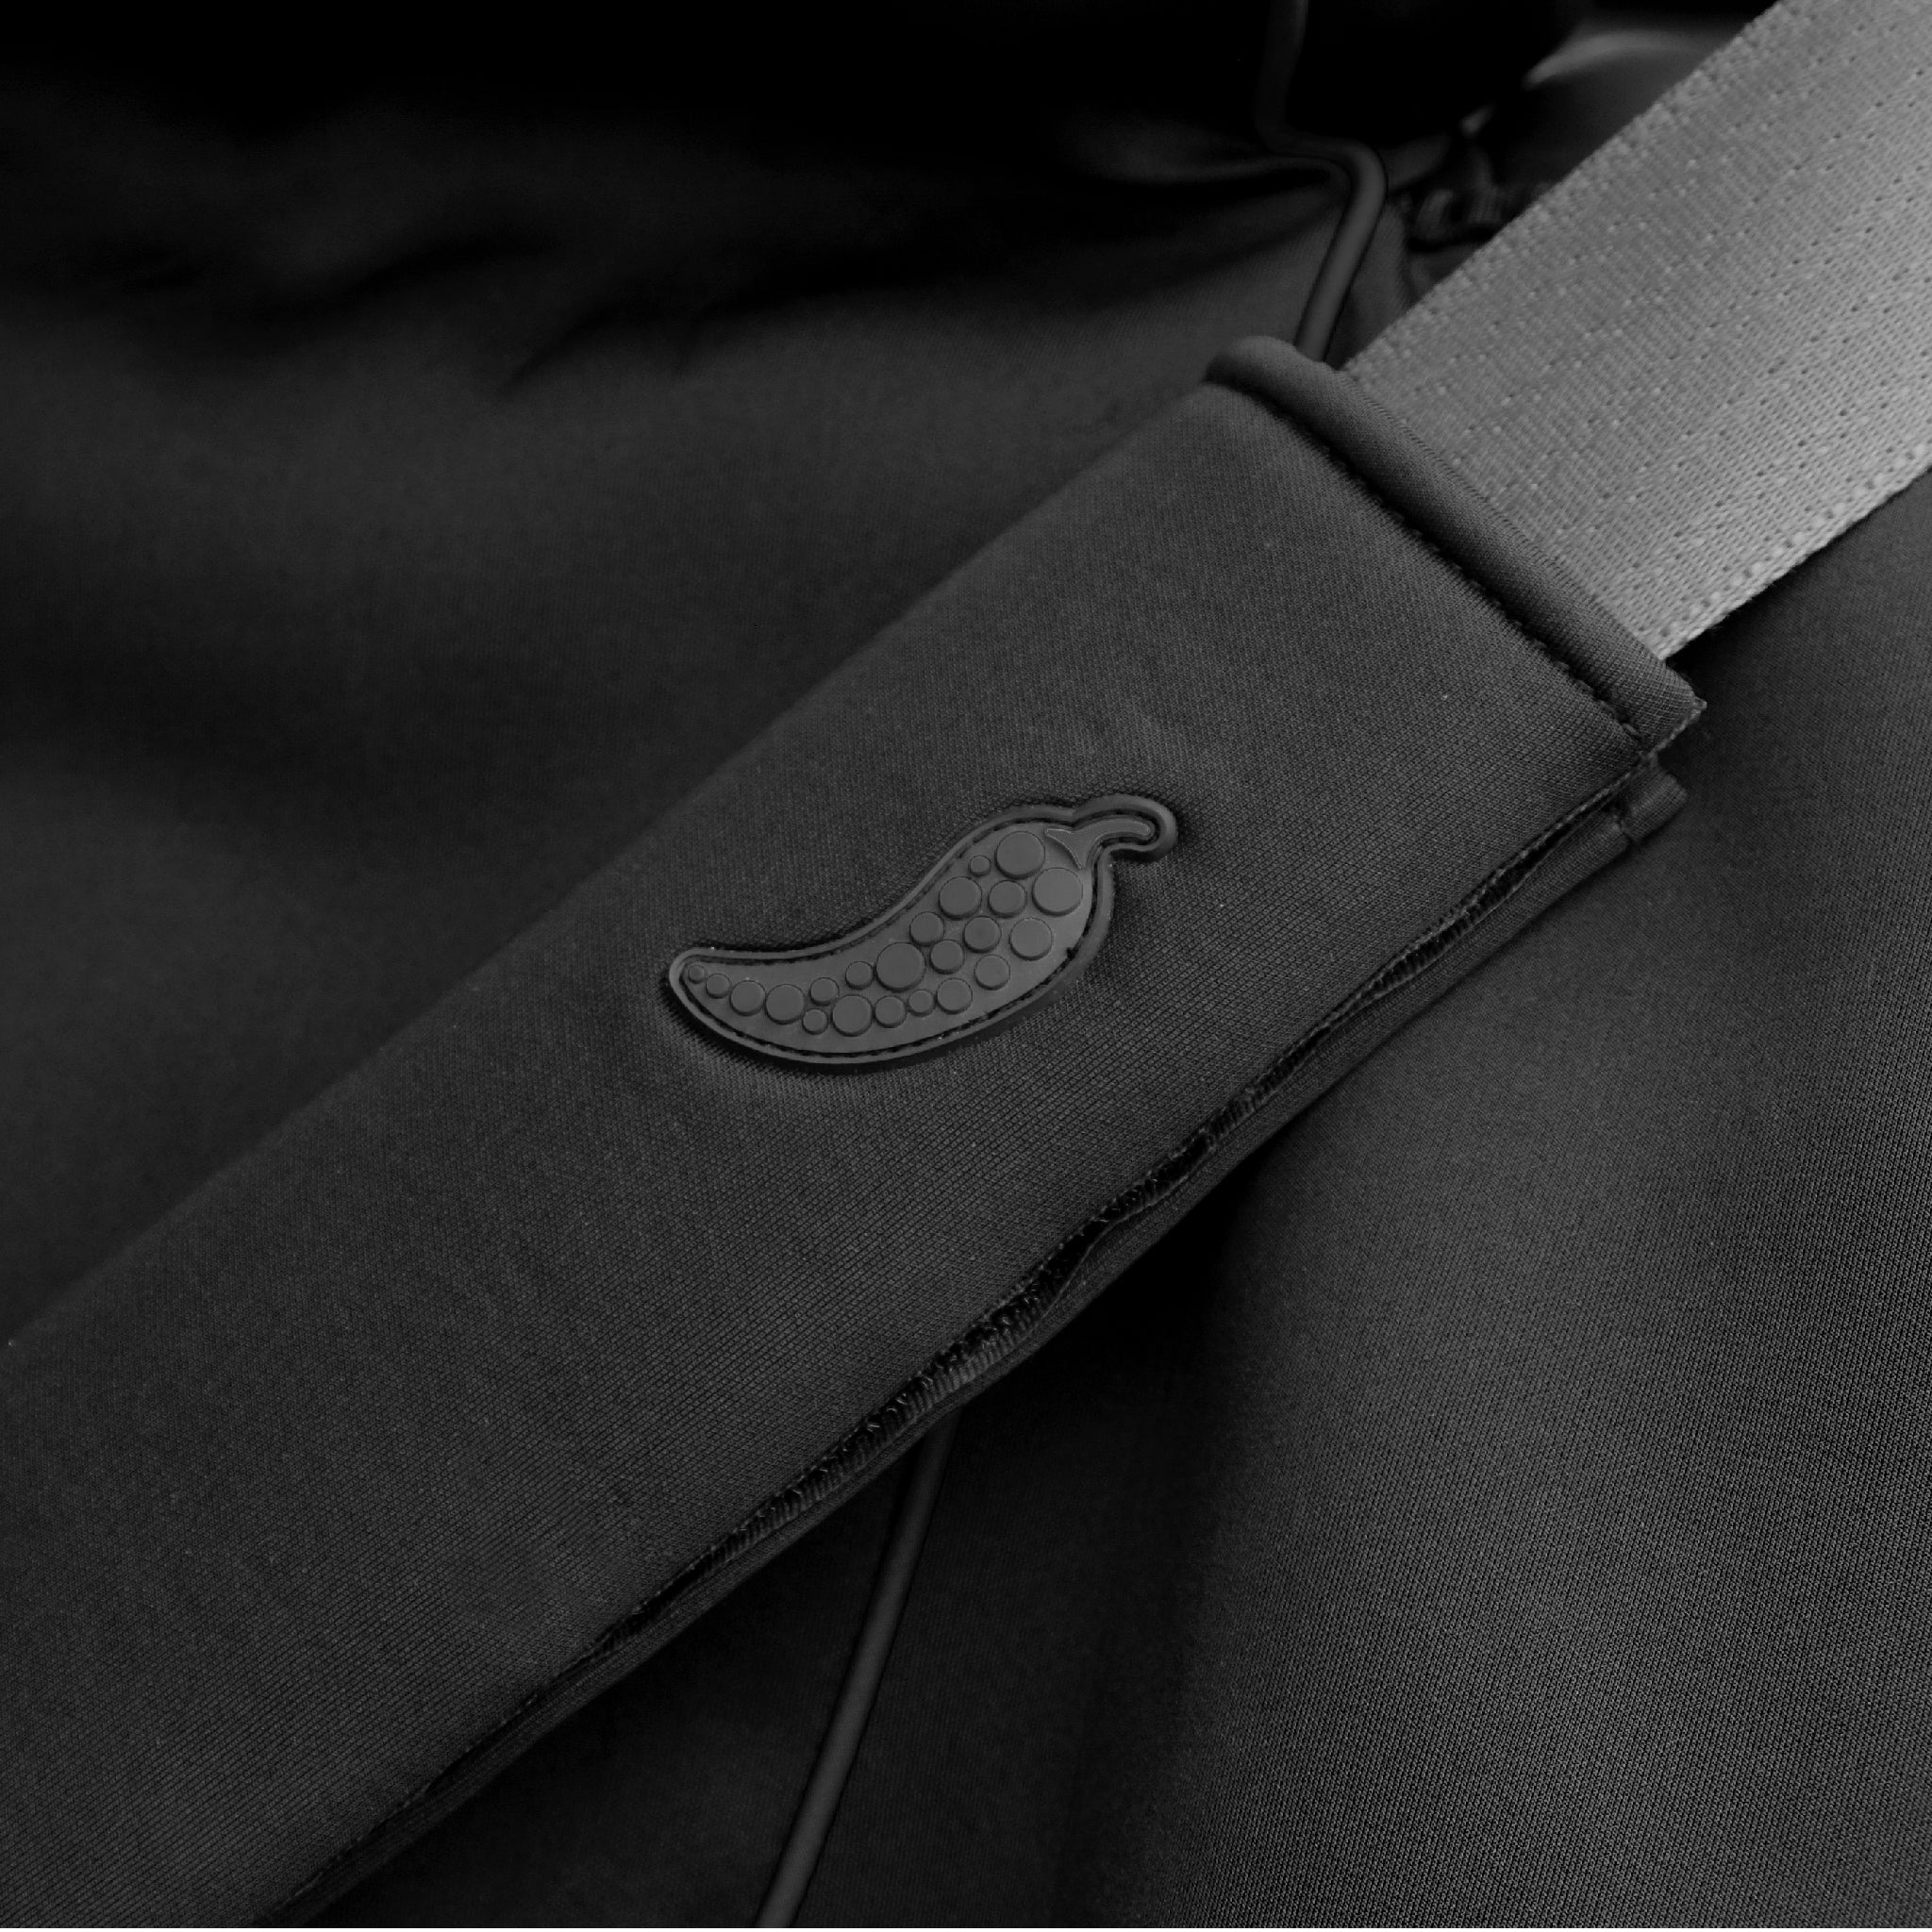 seat belt cover - Dry Rub Spice Wrap - Charcoal